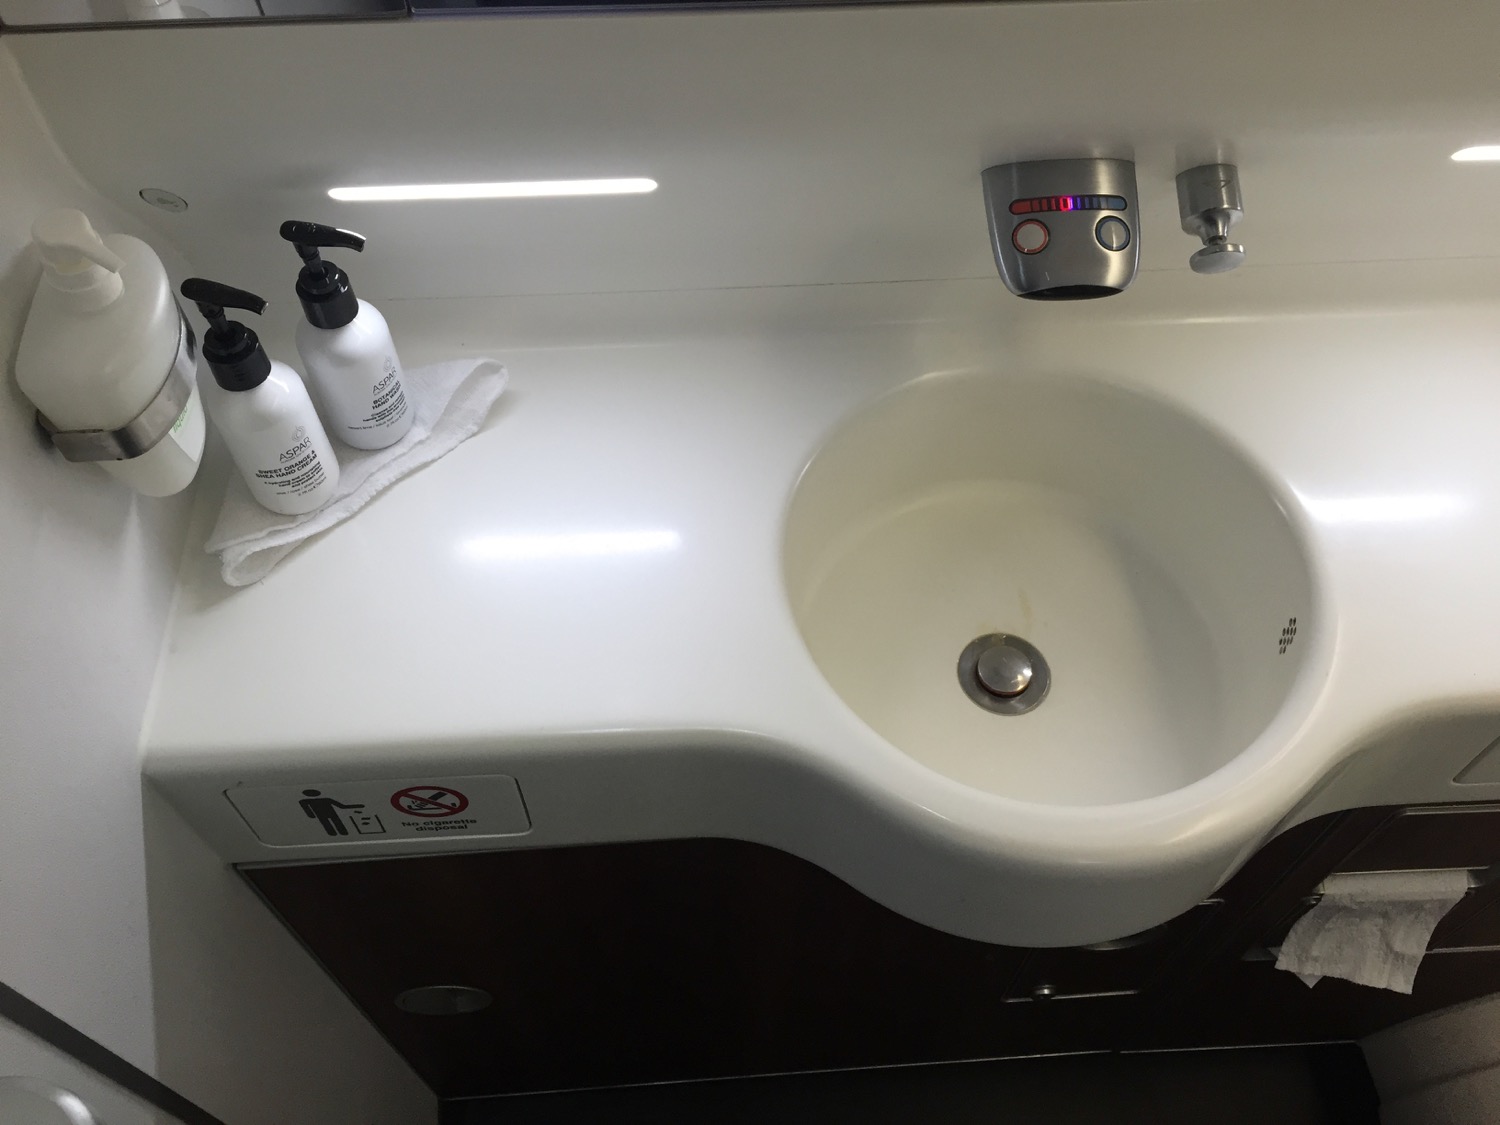 a sink with soap dispensers and bottles on the counter